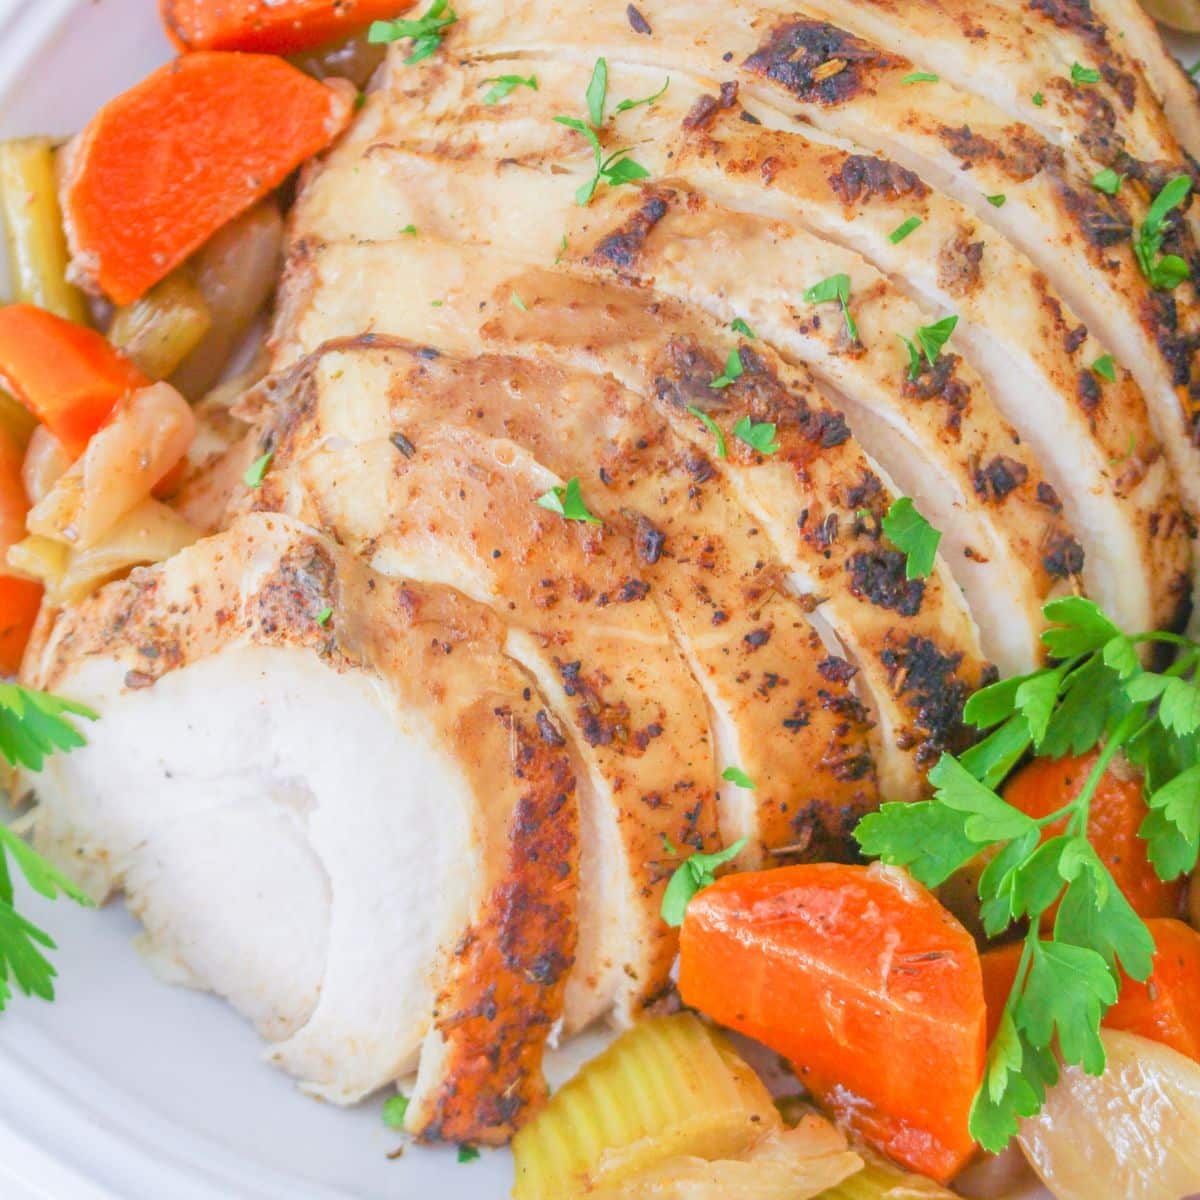 sliced turkey breast on a plate surrounded by vegetables.